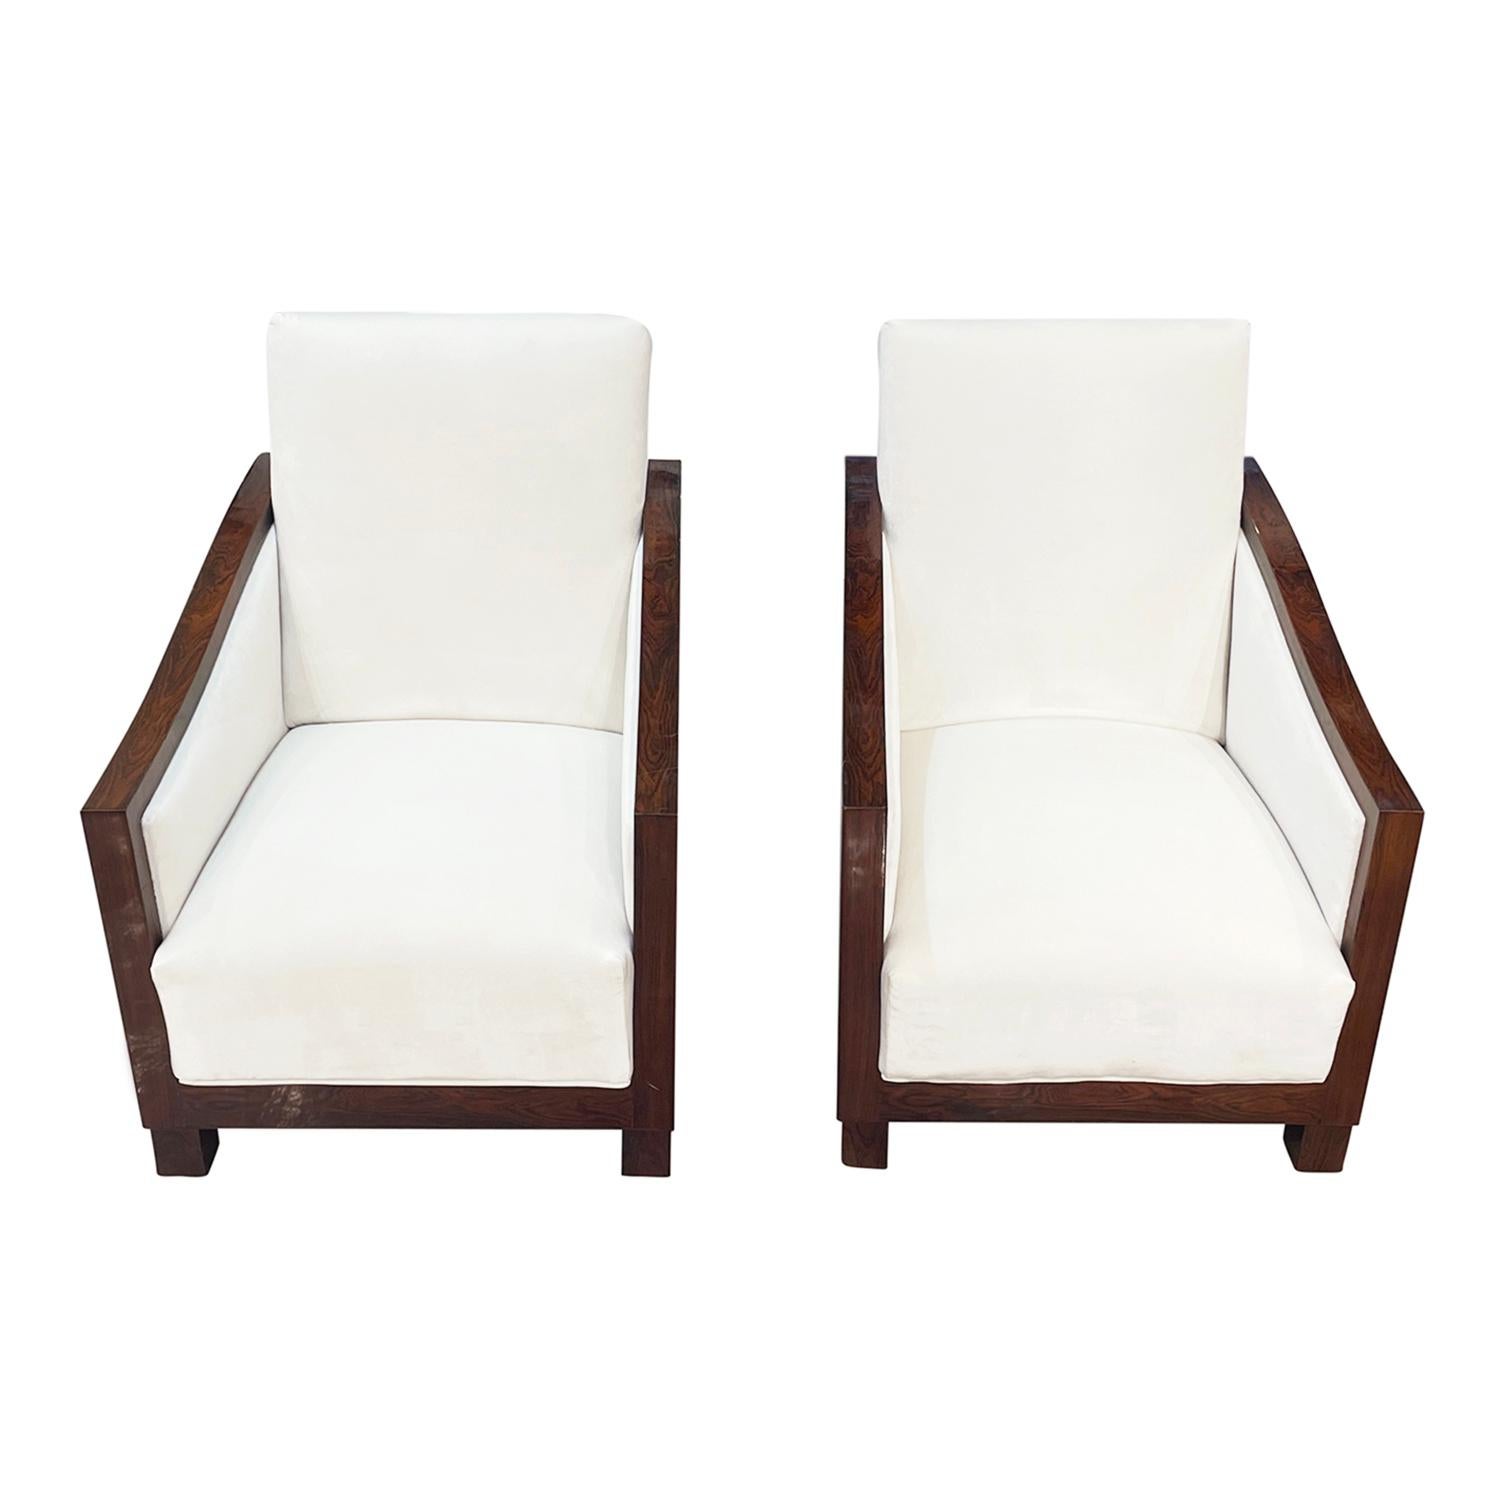 A vintage Art Deco French pair of cocktail club chairs made of hand crafted polished, partly veneered Walnut, in good condition. The Parisian solid wooden library armchairs have an inclined backrest, detailed with arched arms which are partly